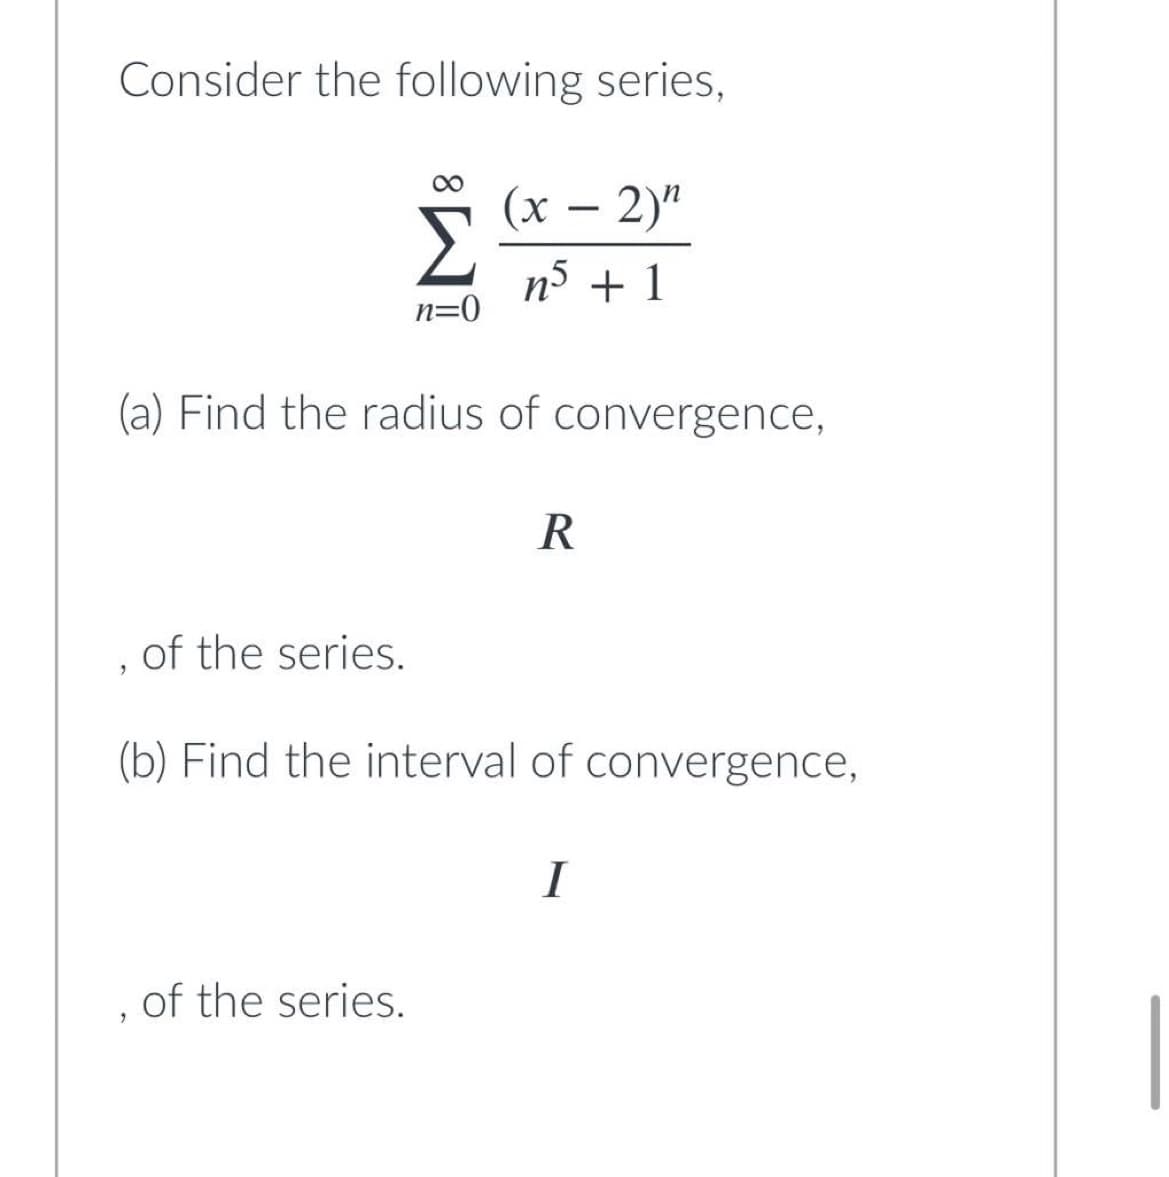 Consider the following series,
(x - 2)"
Σ n5 + 1
n=0
(a) Find the radius of convergence,
R
of the series.
9
(b) Find the interval of convergence,
I
of the series.
2